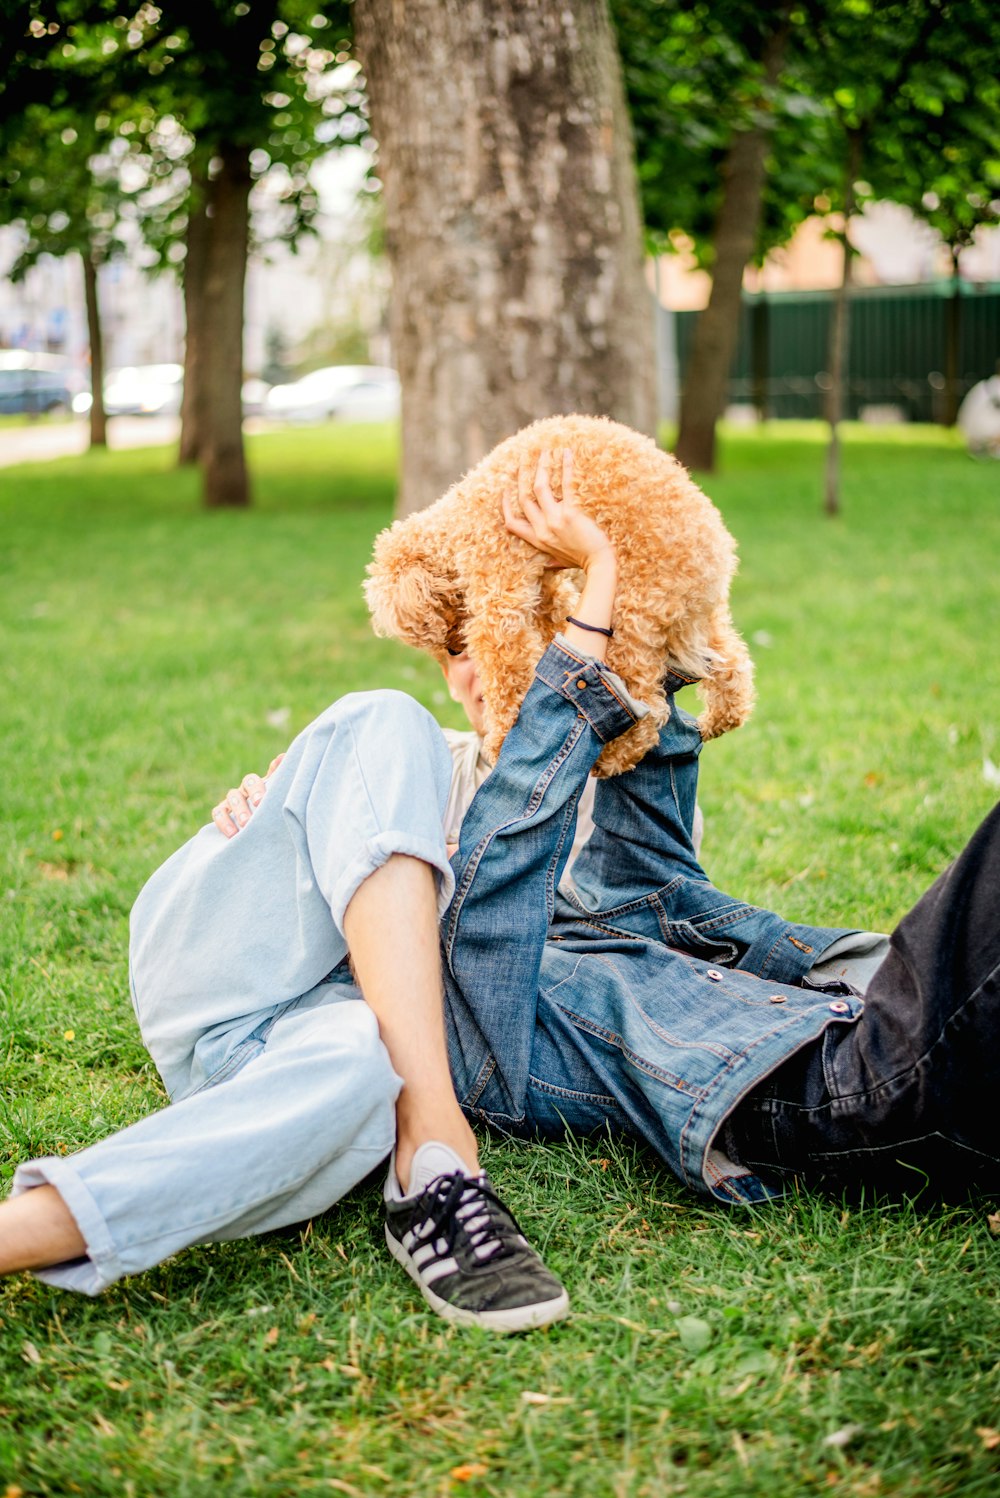 a person laying in the grass with a teddy bear